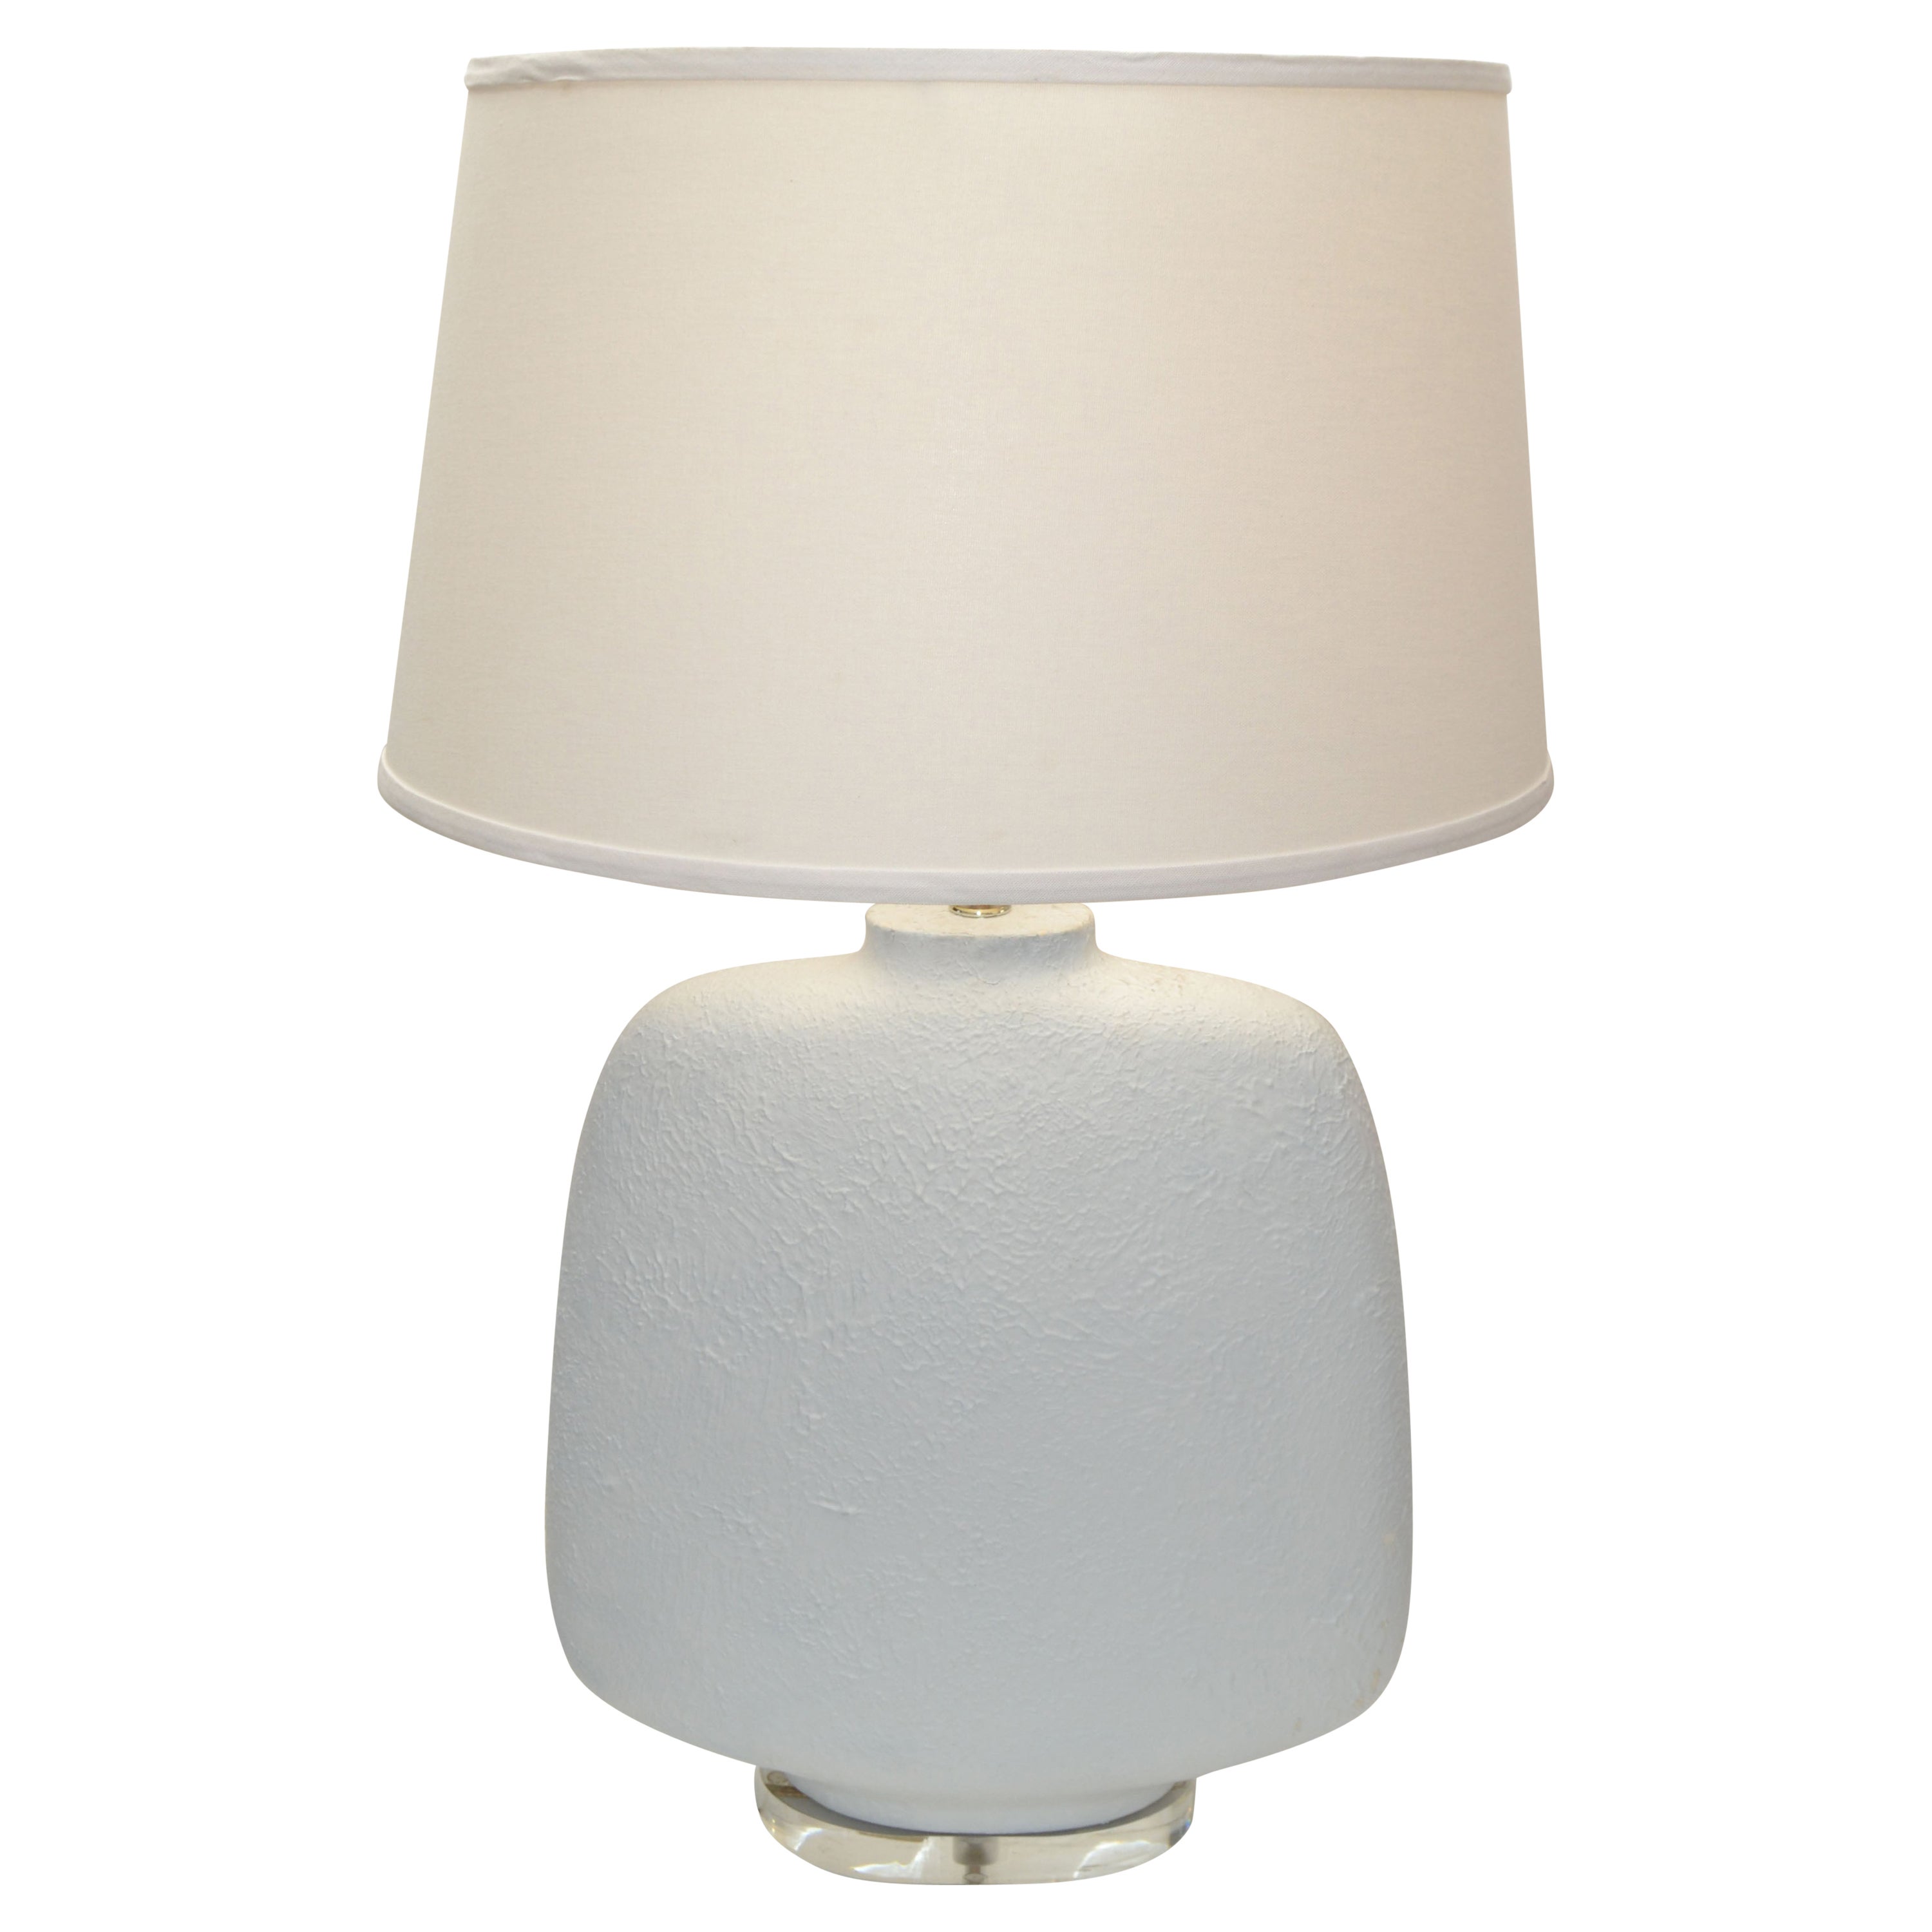 Mid-Century Modern Iconic Sculptural Textured White Plaster Table Lamp on Lucite For Sale